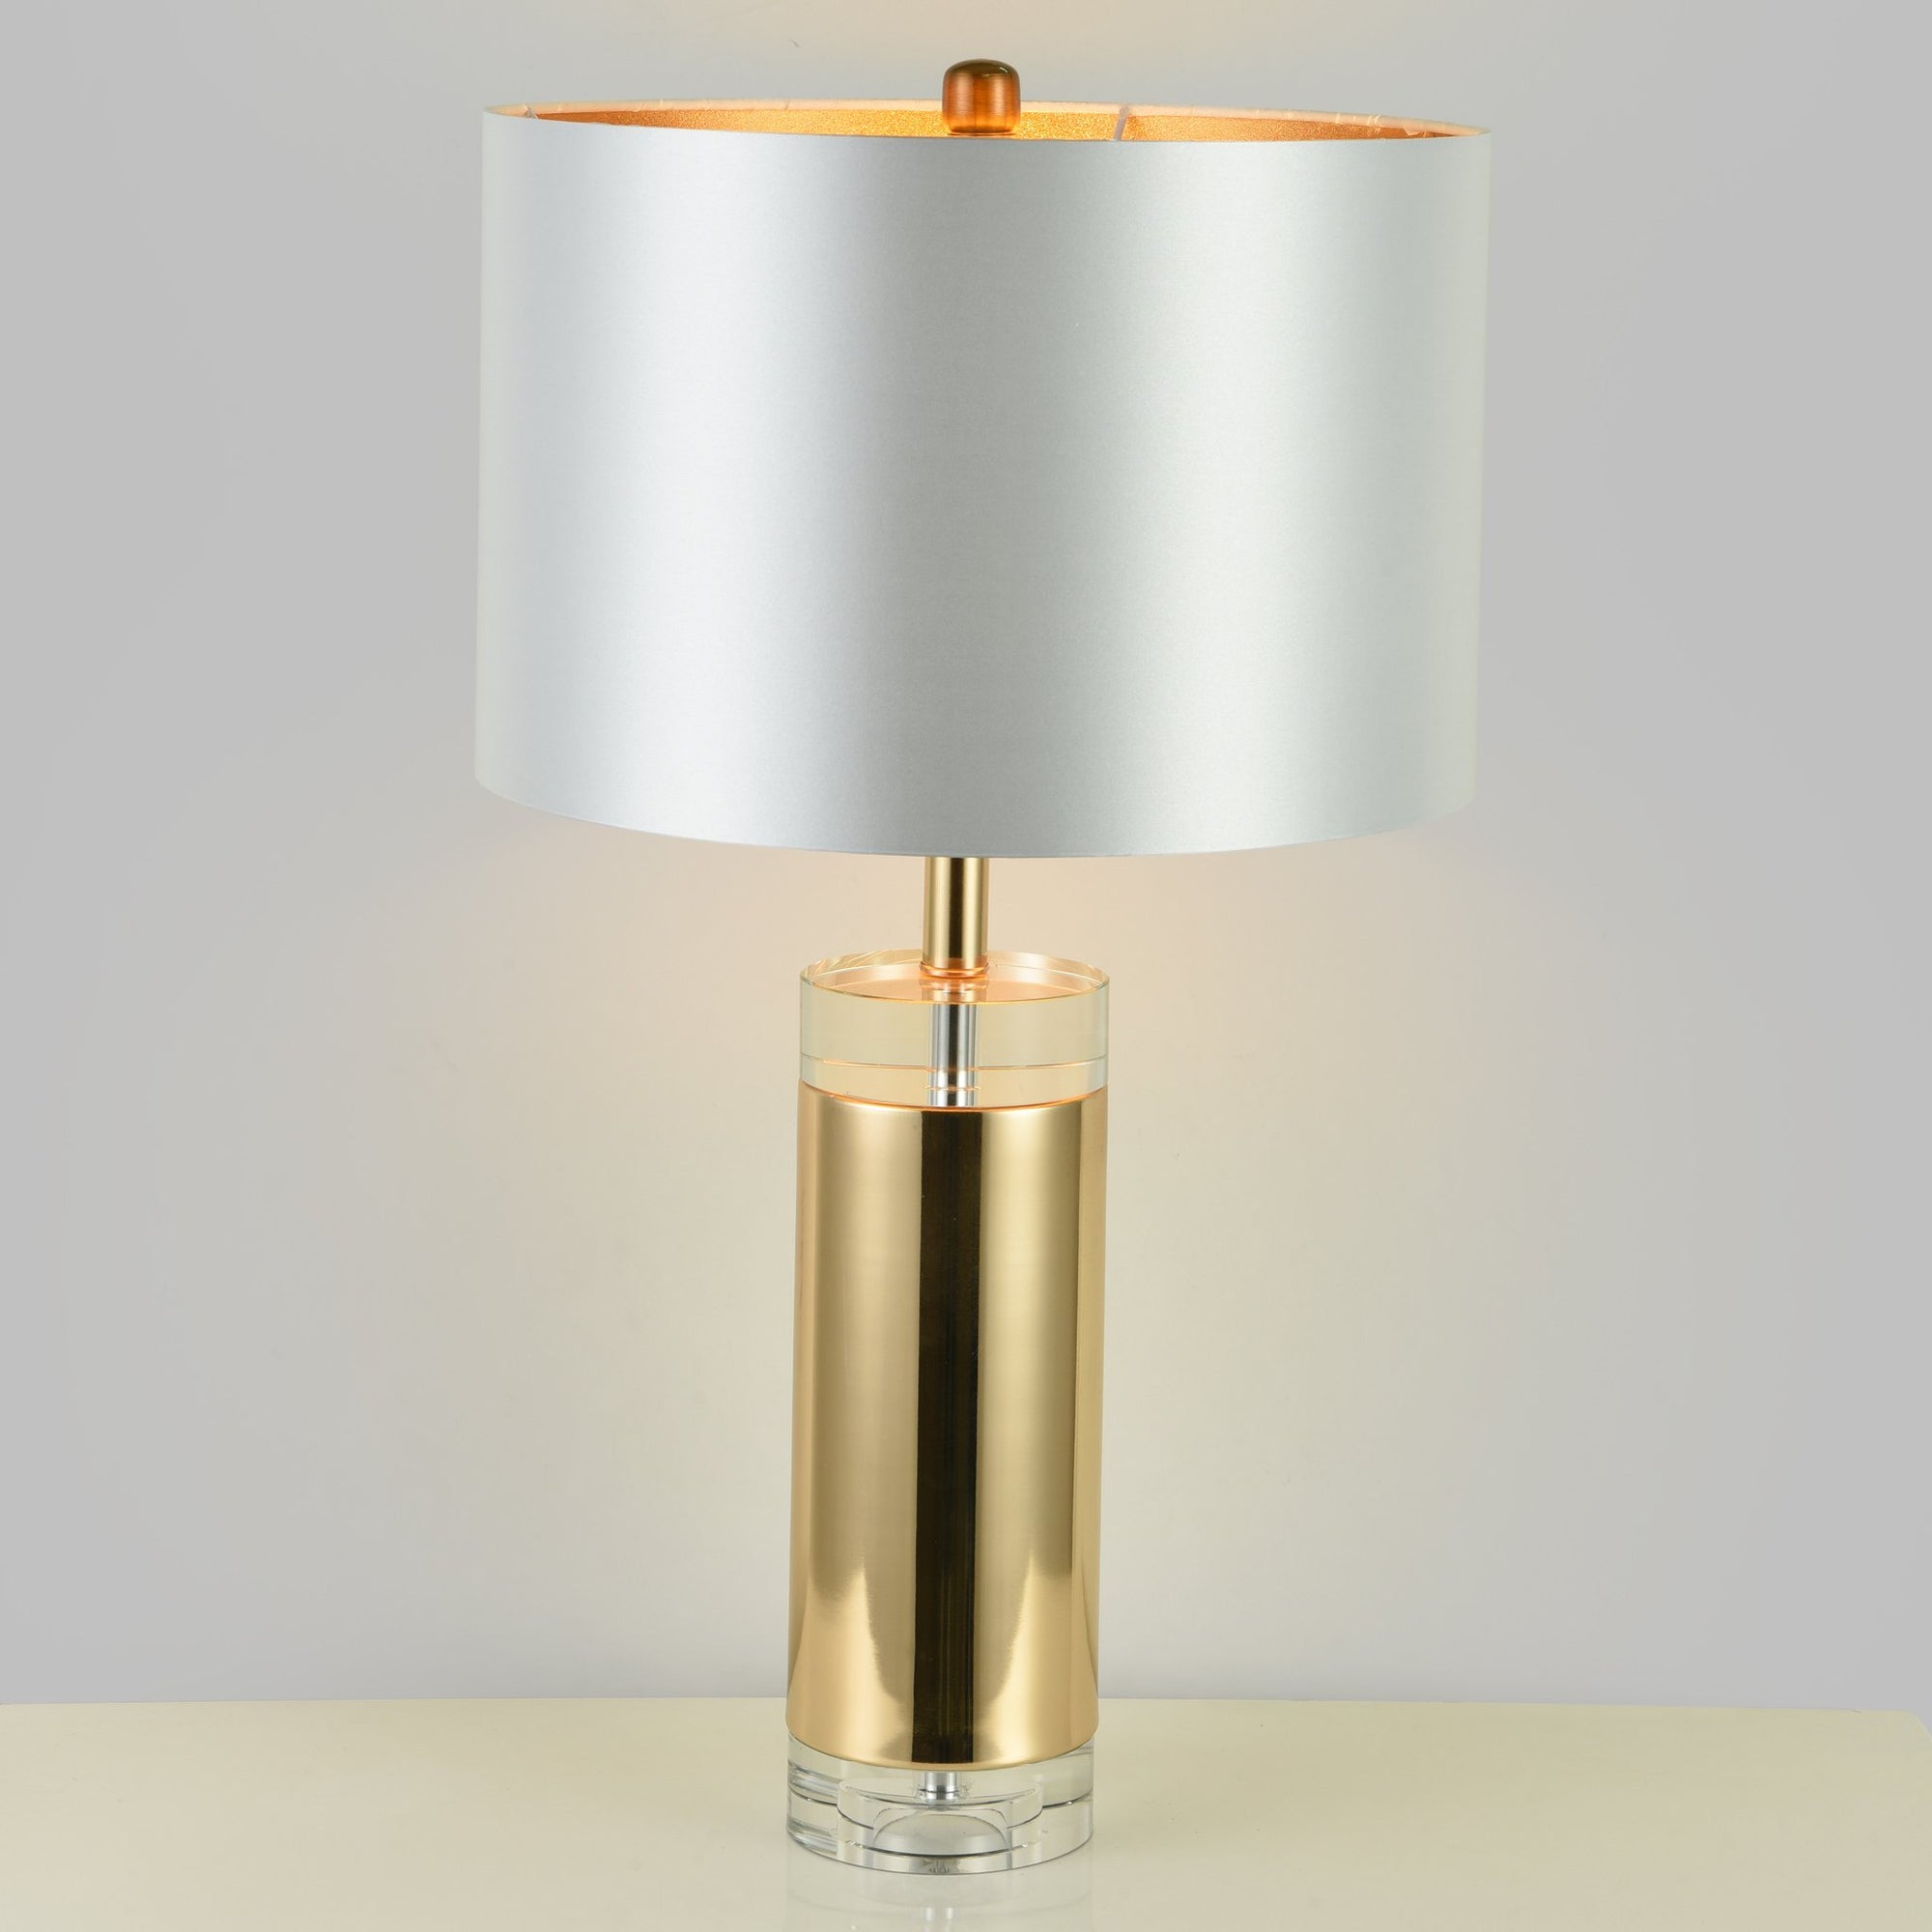 Buy Show Off Table Lamp Online